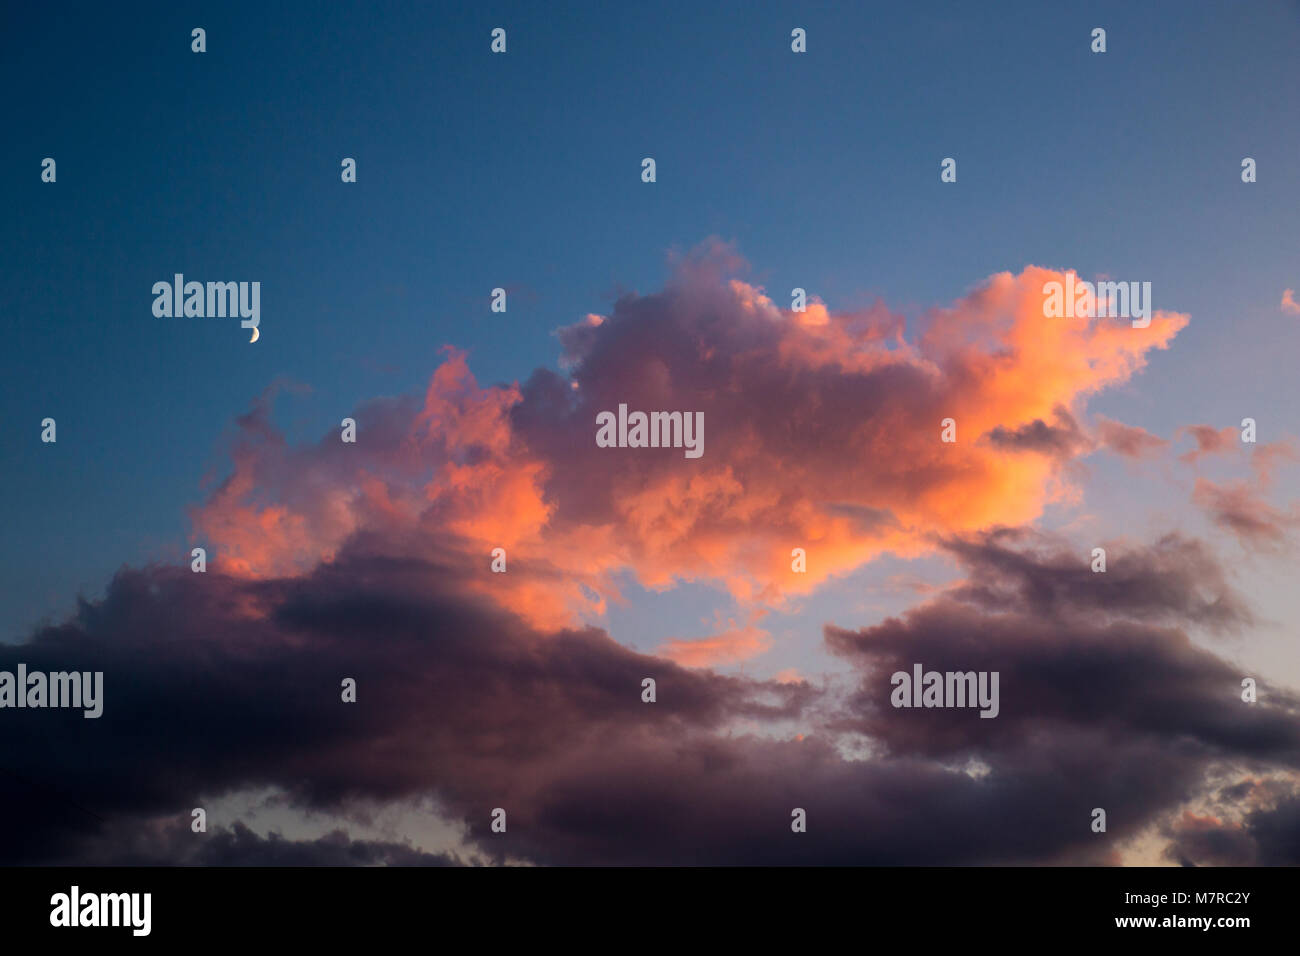 Sky with Moon and rose Clouds during Sunset. Stock Photo